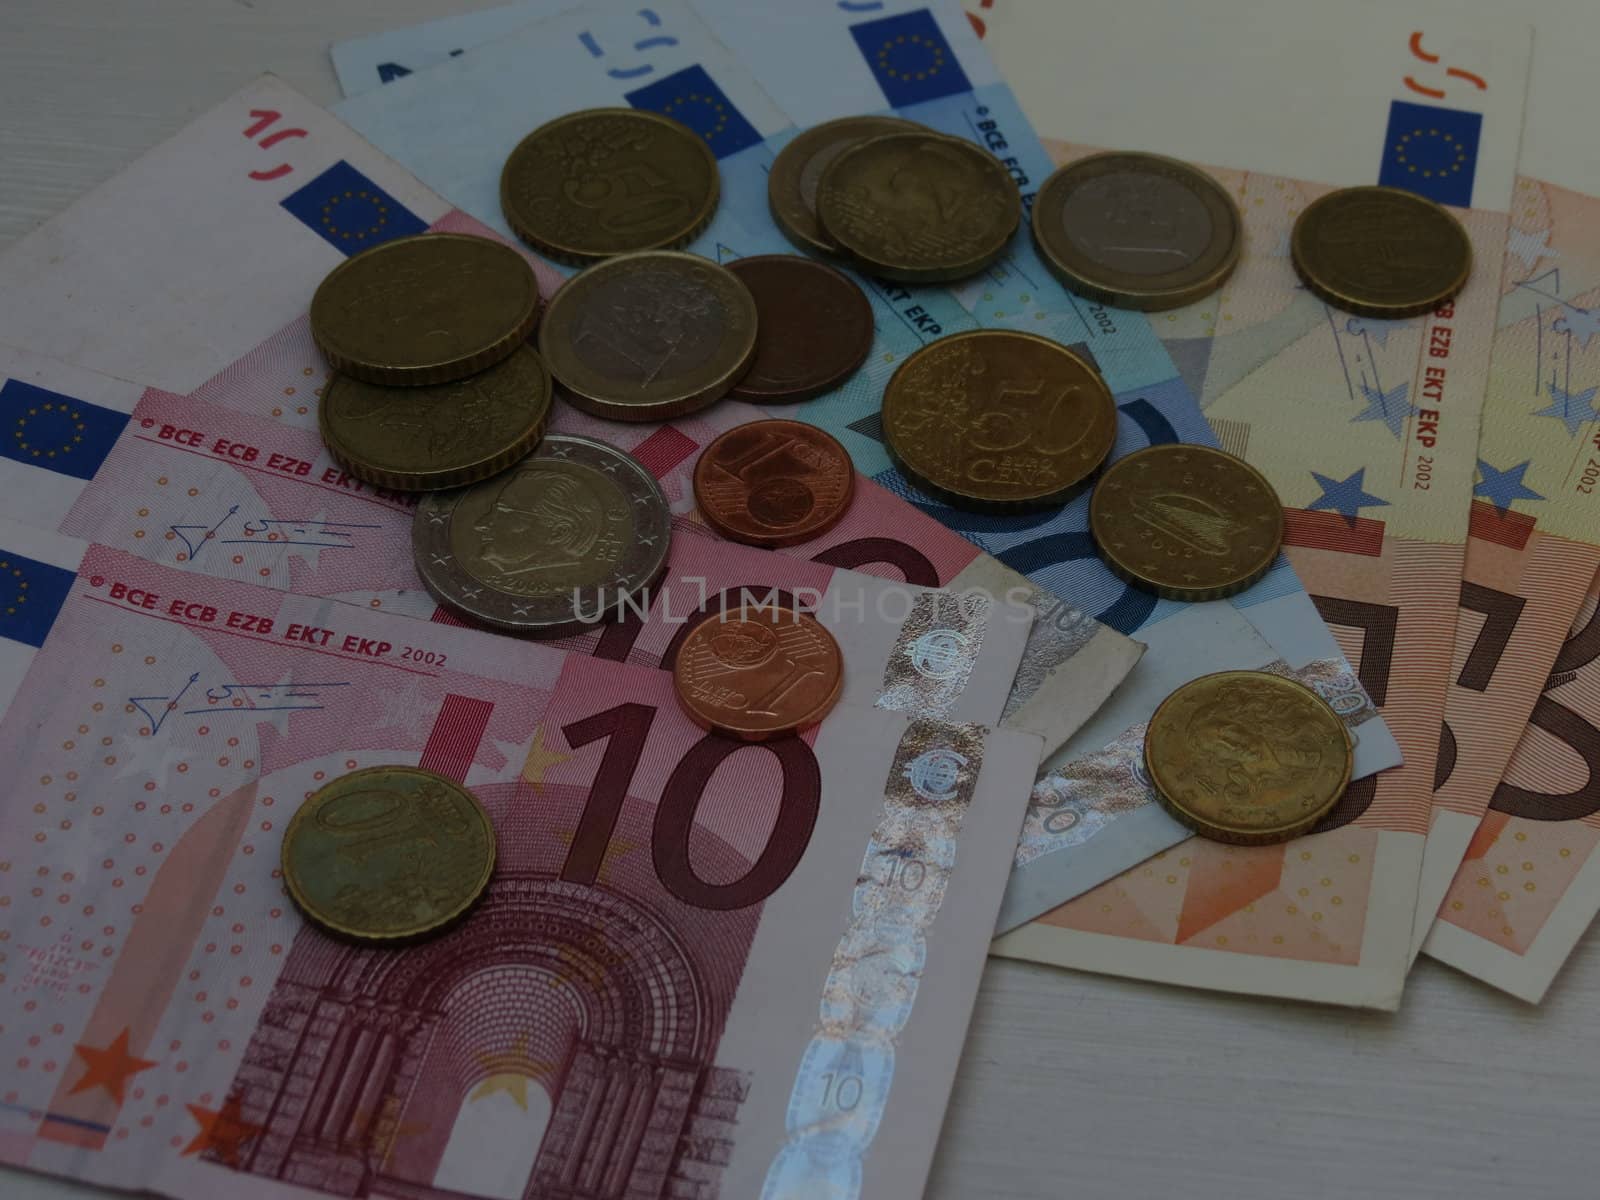 Euro (EUR) banknotes and coins money useful as a background or money concept